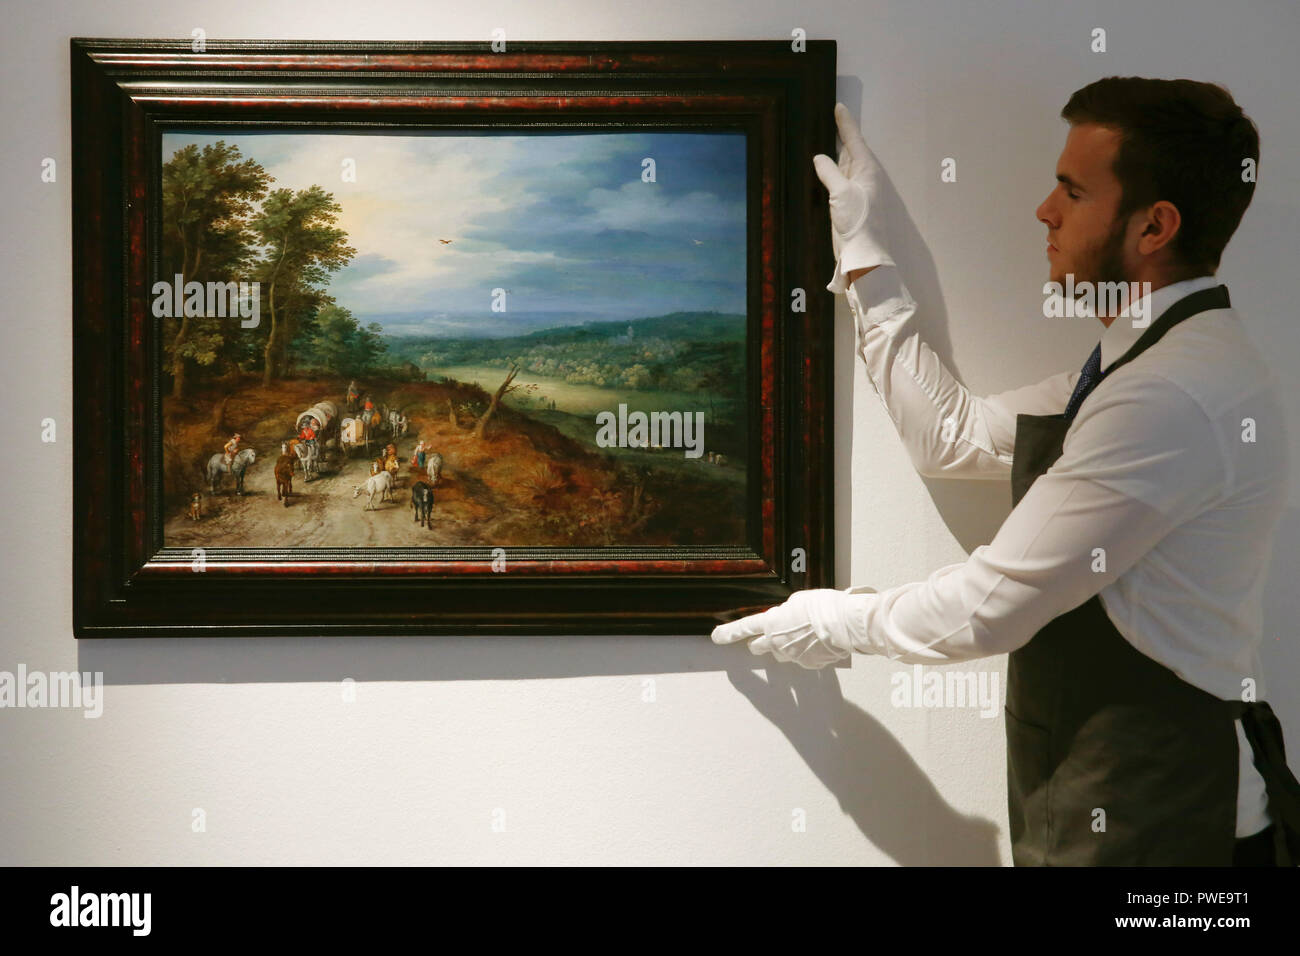 London, UK, 16th Oct 2018. A Christie's employee holds Dutch master Jan Breughel the Elder 's works 'An extensive wooded landscapef' at Christie's AuctionHouse in London, UK, Tuesday October 16, 2017. The piece is expected to achieve up to £5million when it comes to auction as part of the Albada Jelgersma Collection sale during Christie's Classic Week in December. Photograph : Credit: Luke MacGregor/Alamy Live News Stock Photo